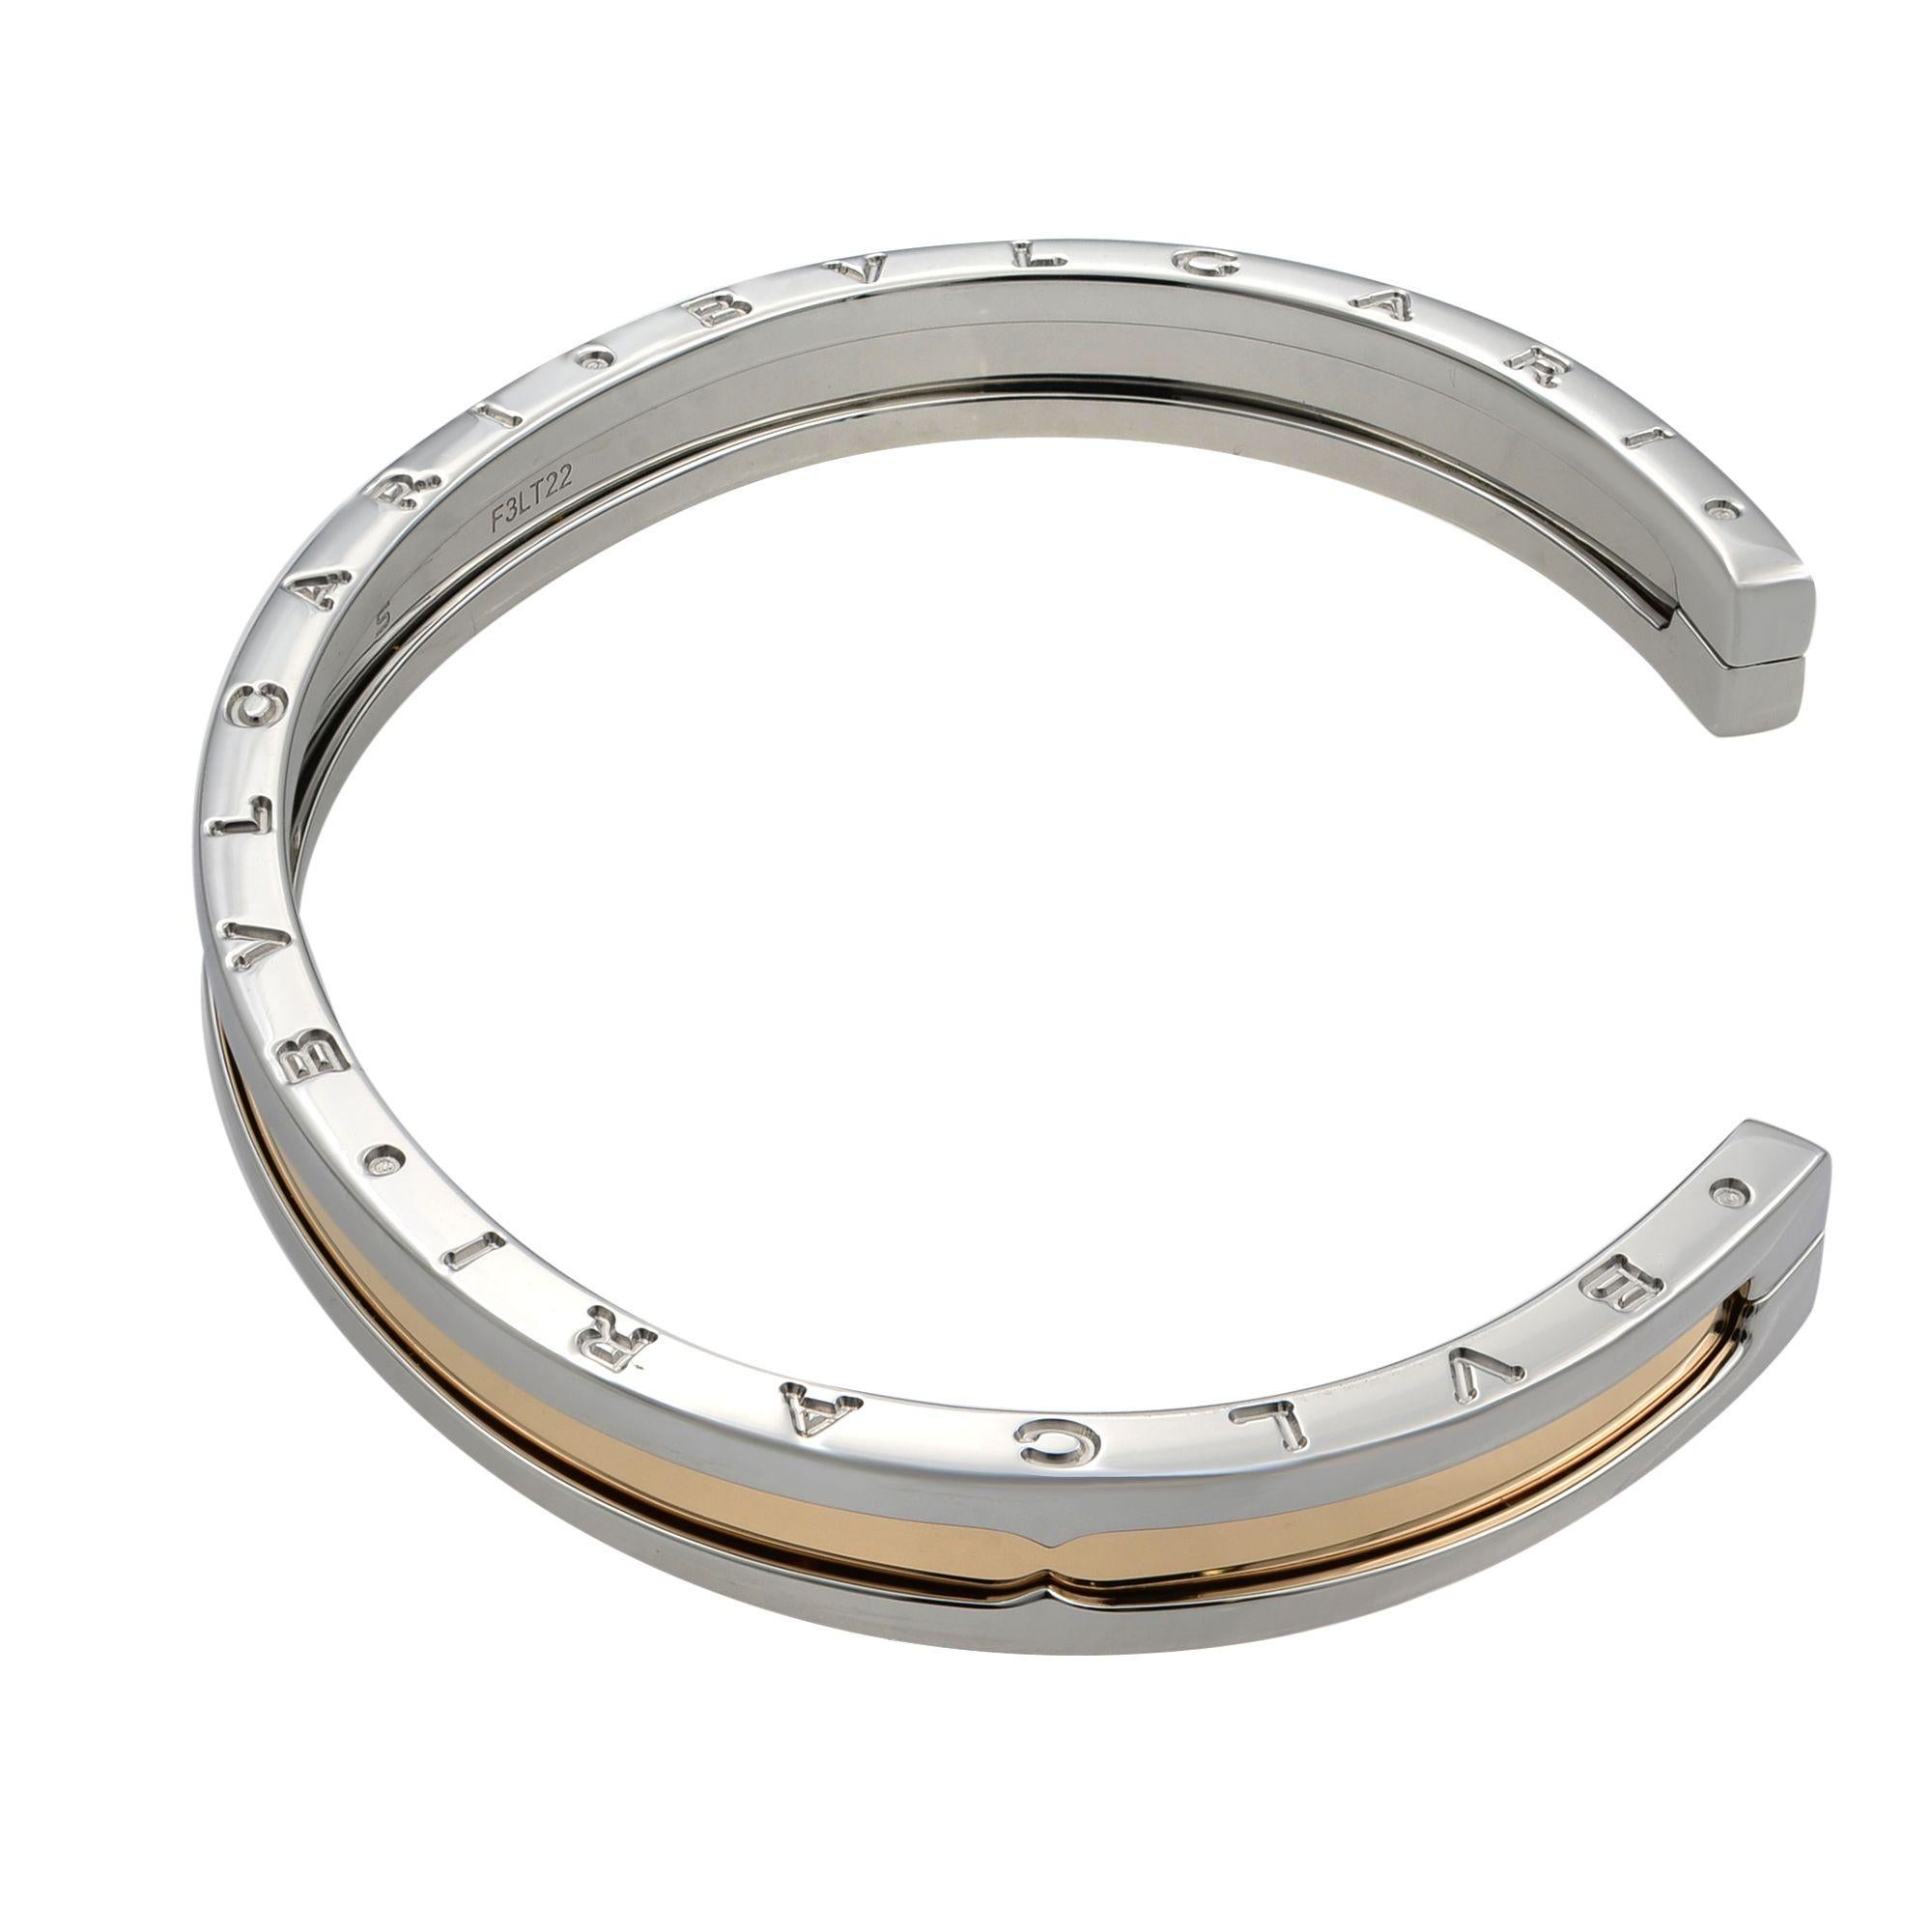 A stainless steel and 18k rose gold cuff bracelet by Bvlgari from the B.zero1 collection. The stainless steel outer edge of the bracelet has Bvlgari Bvlgari engraved on both sides with an 18k rose gold middle section. The bracelet is a cuff design